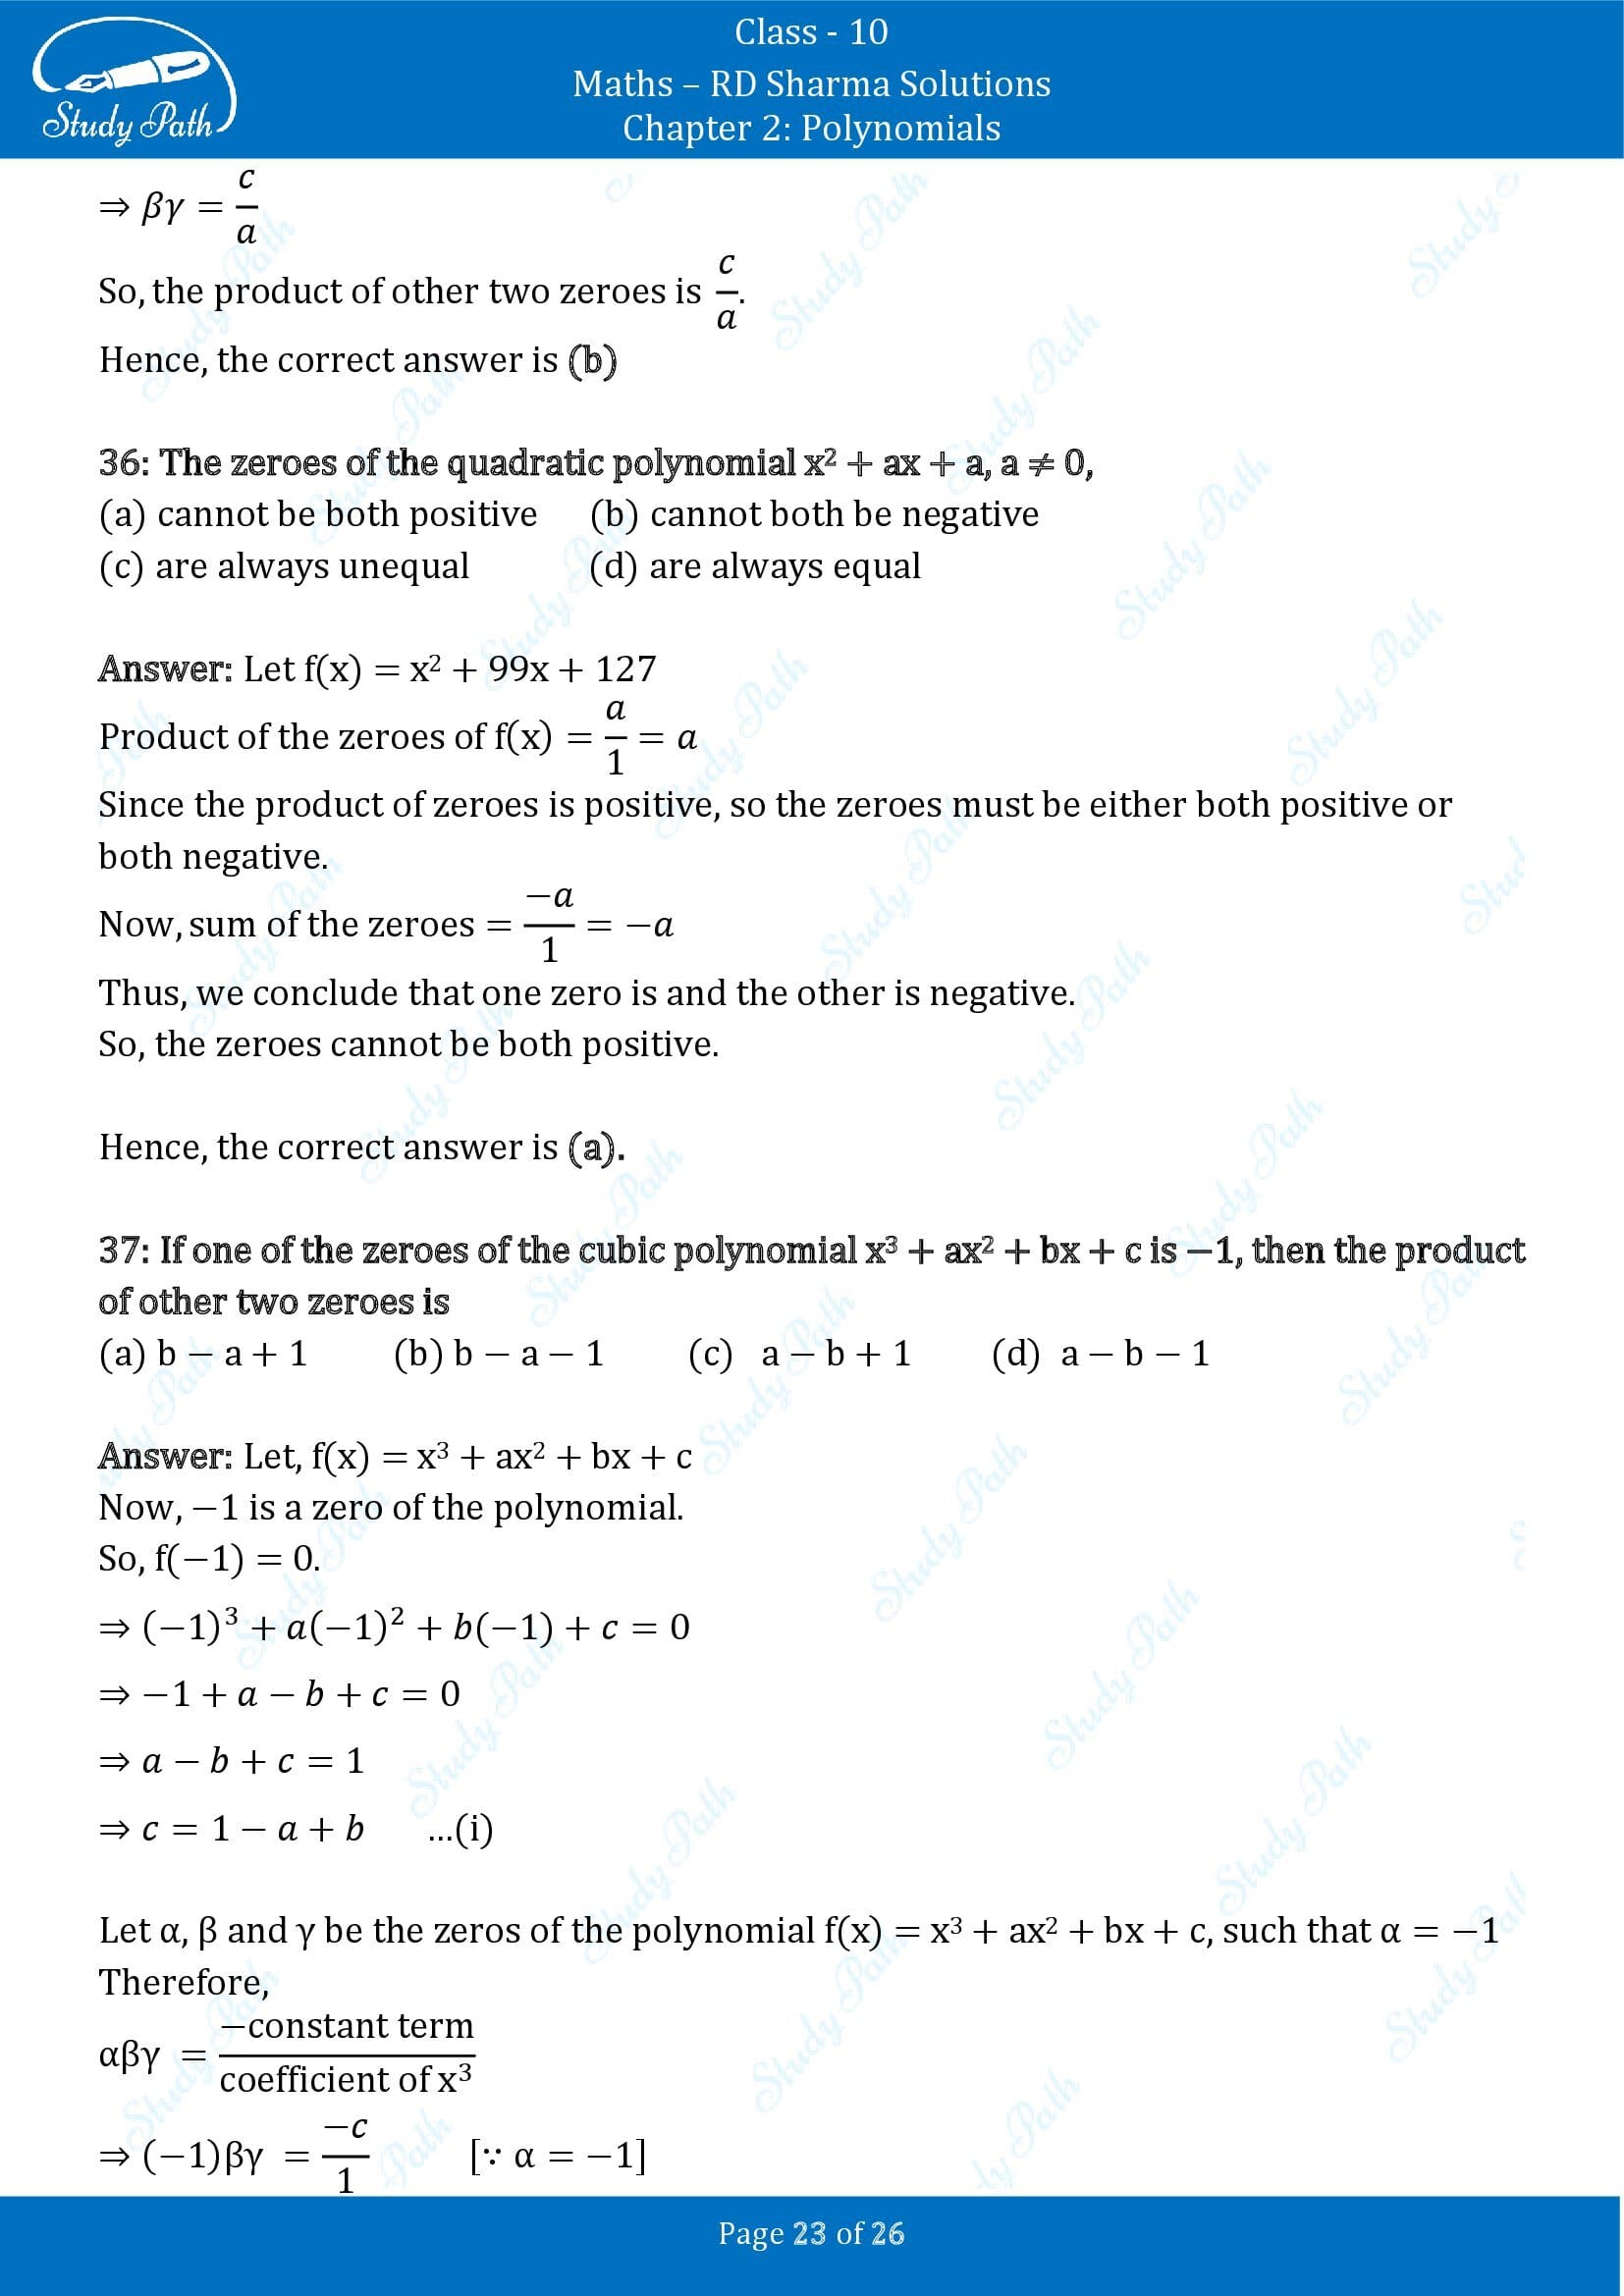 RD Sharma Solutions Class 10 Chapter 2 Polynomials Multiple Choice Questions MCQs 00023